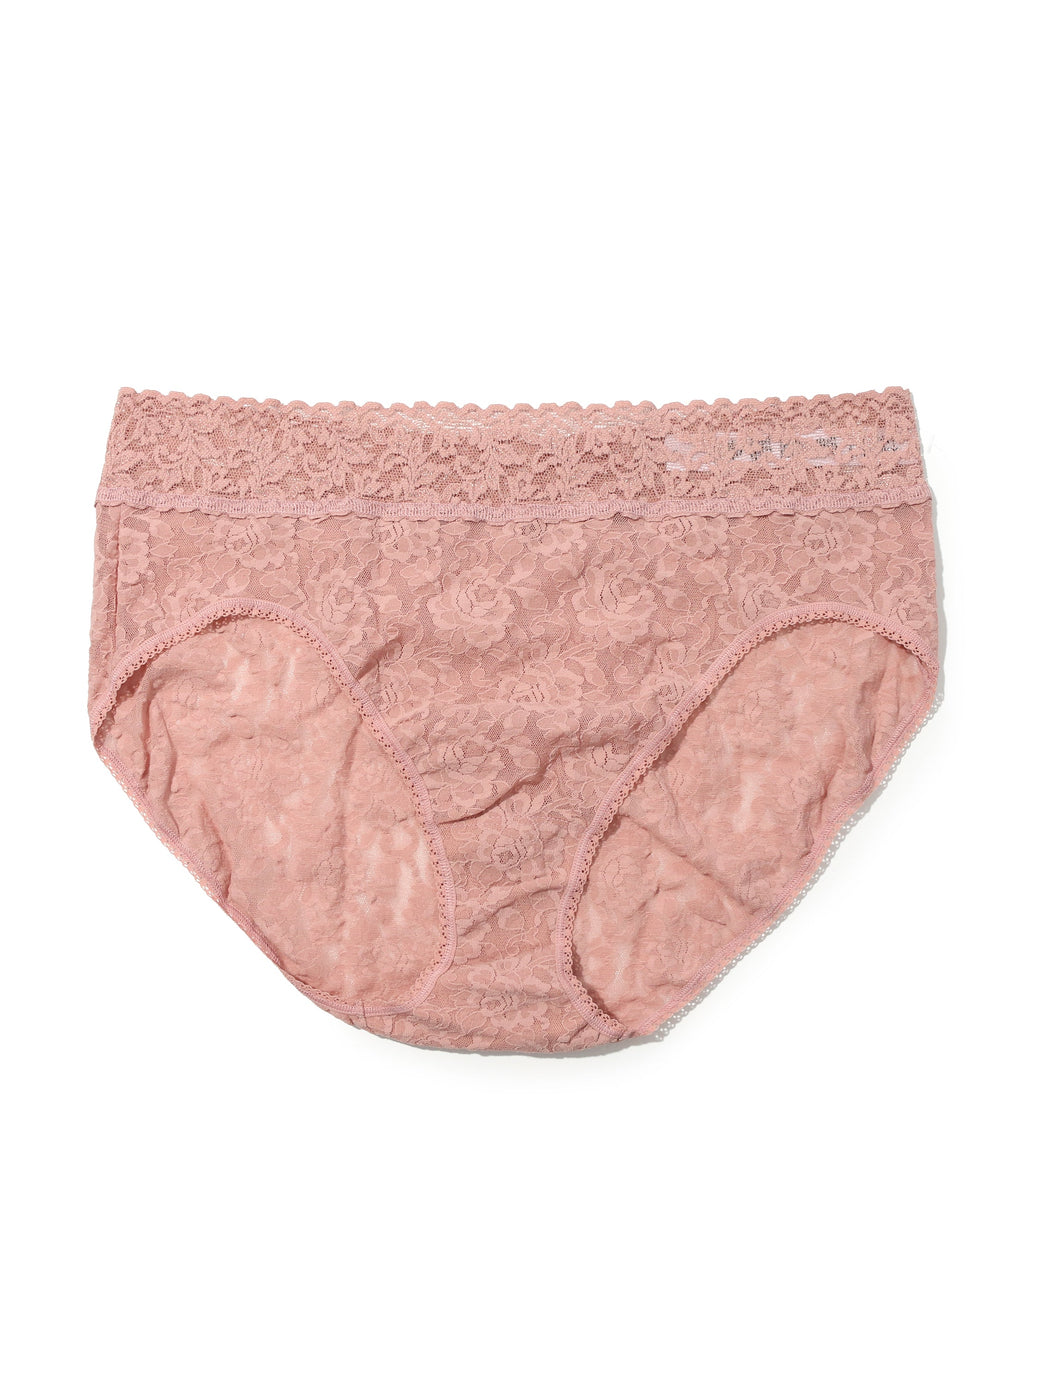 Plus Size Signature Lace French Brief Desert Rose Pink Sale